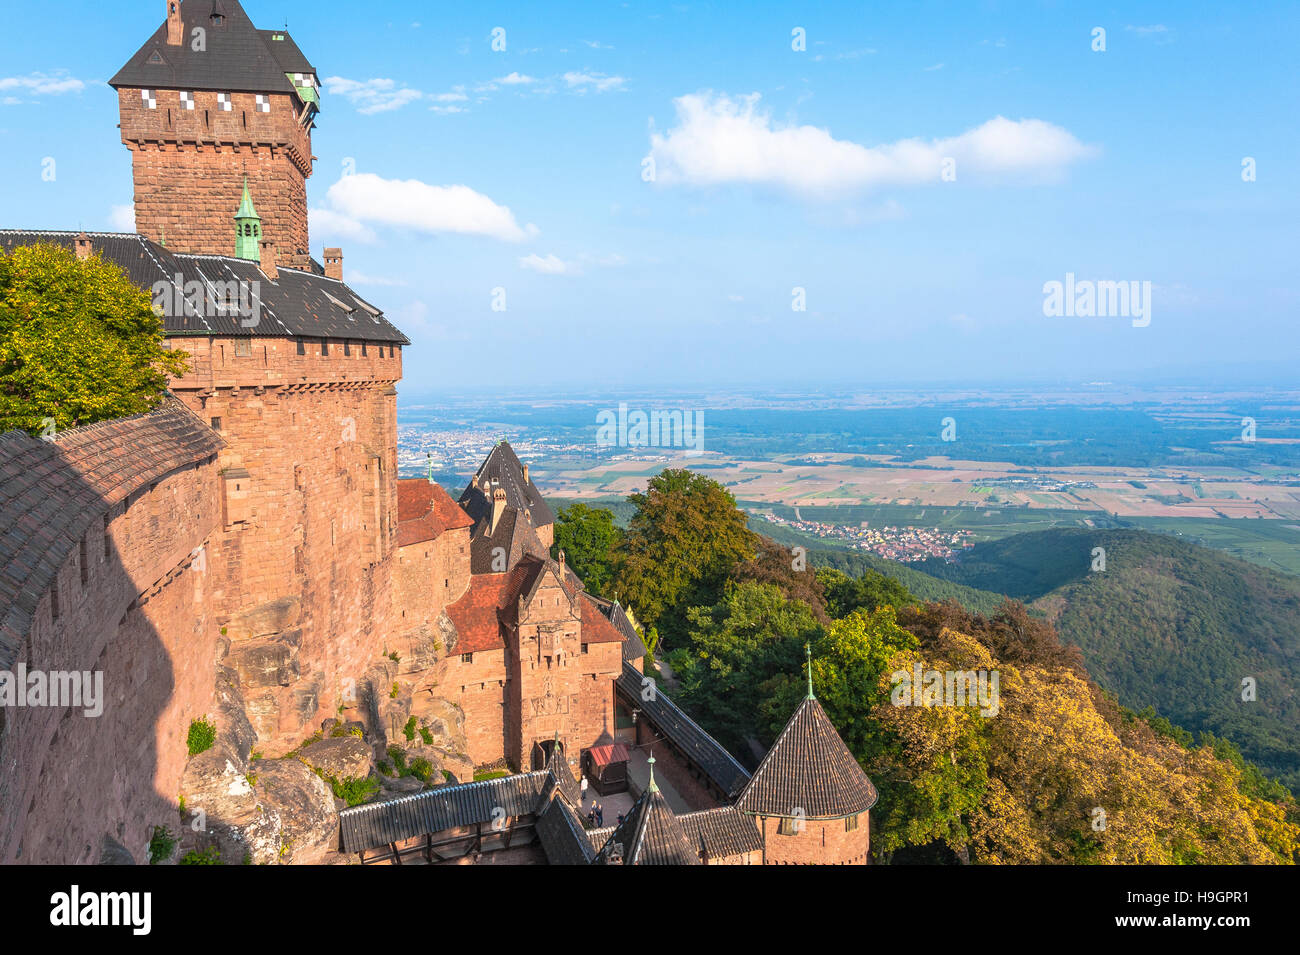 Castle Haut-Koenigsburg with panoramic view, castle of the middle ages, rebuilt in romantic architecture, Alsace, France Stock Photo